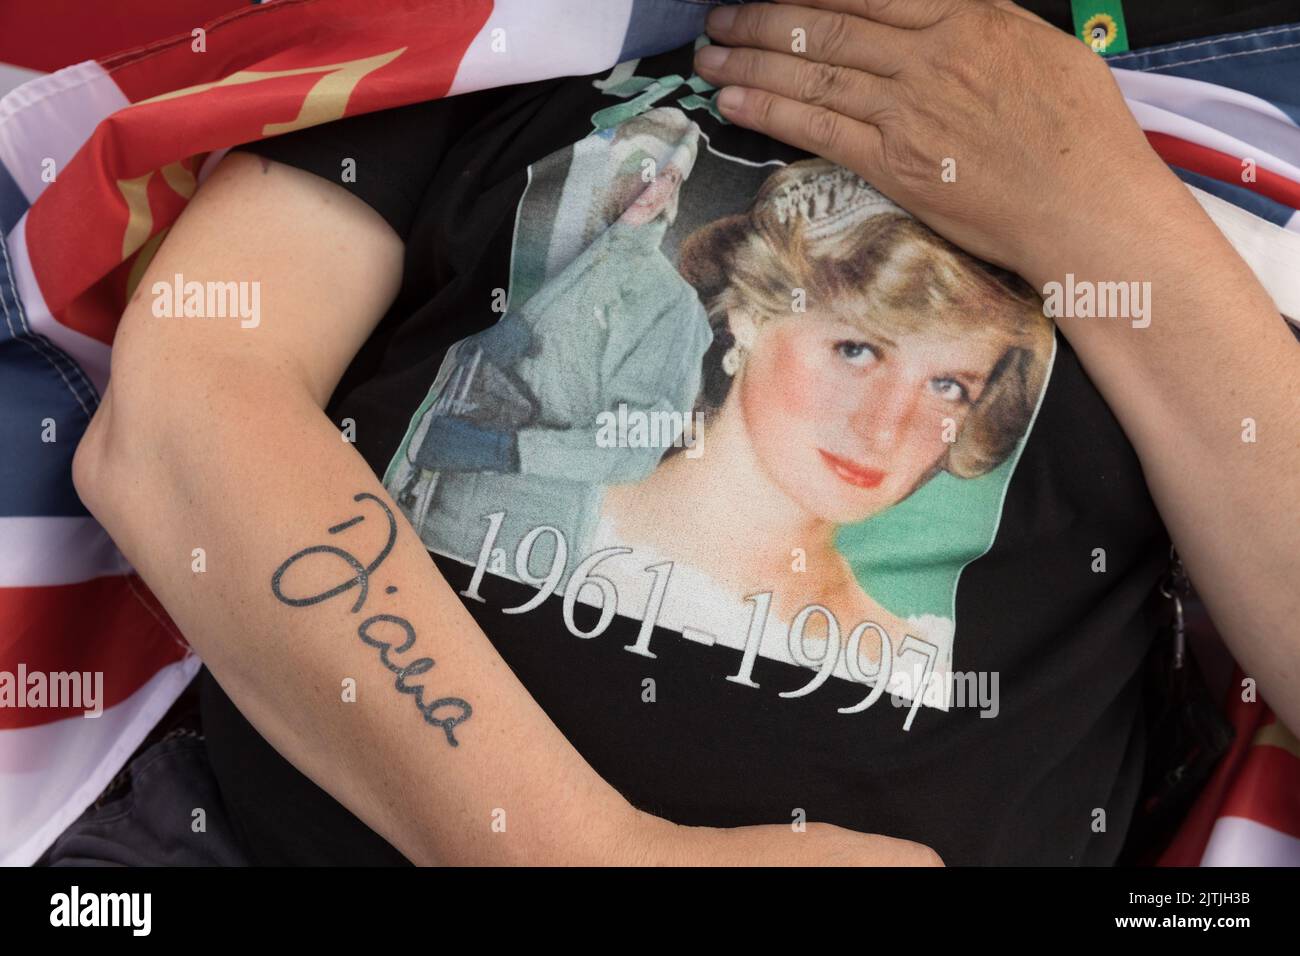 Kensington Palace, London, 31st August 2022.   Royal Fan, Sky London, shows his new tattoo of Diana's signature outside Kensington Palace on the 25th Anniversary of the death of Diana, Princess of Wales.  The Princess was killed in a car crash in Paris on this day in 1997.  Amanda Rose/Alamy Live News Stock Photo